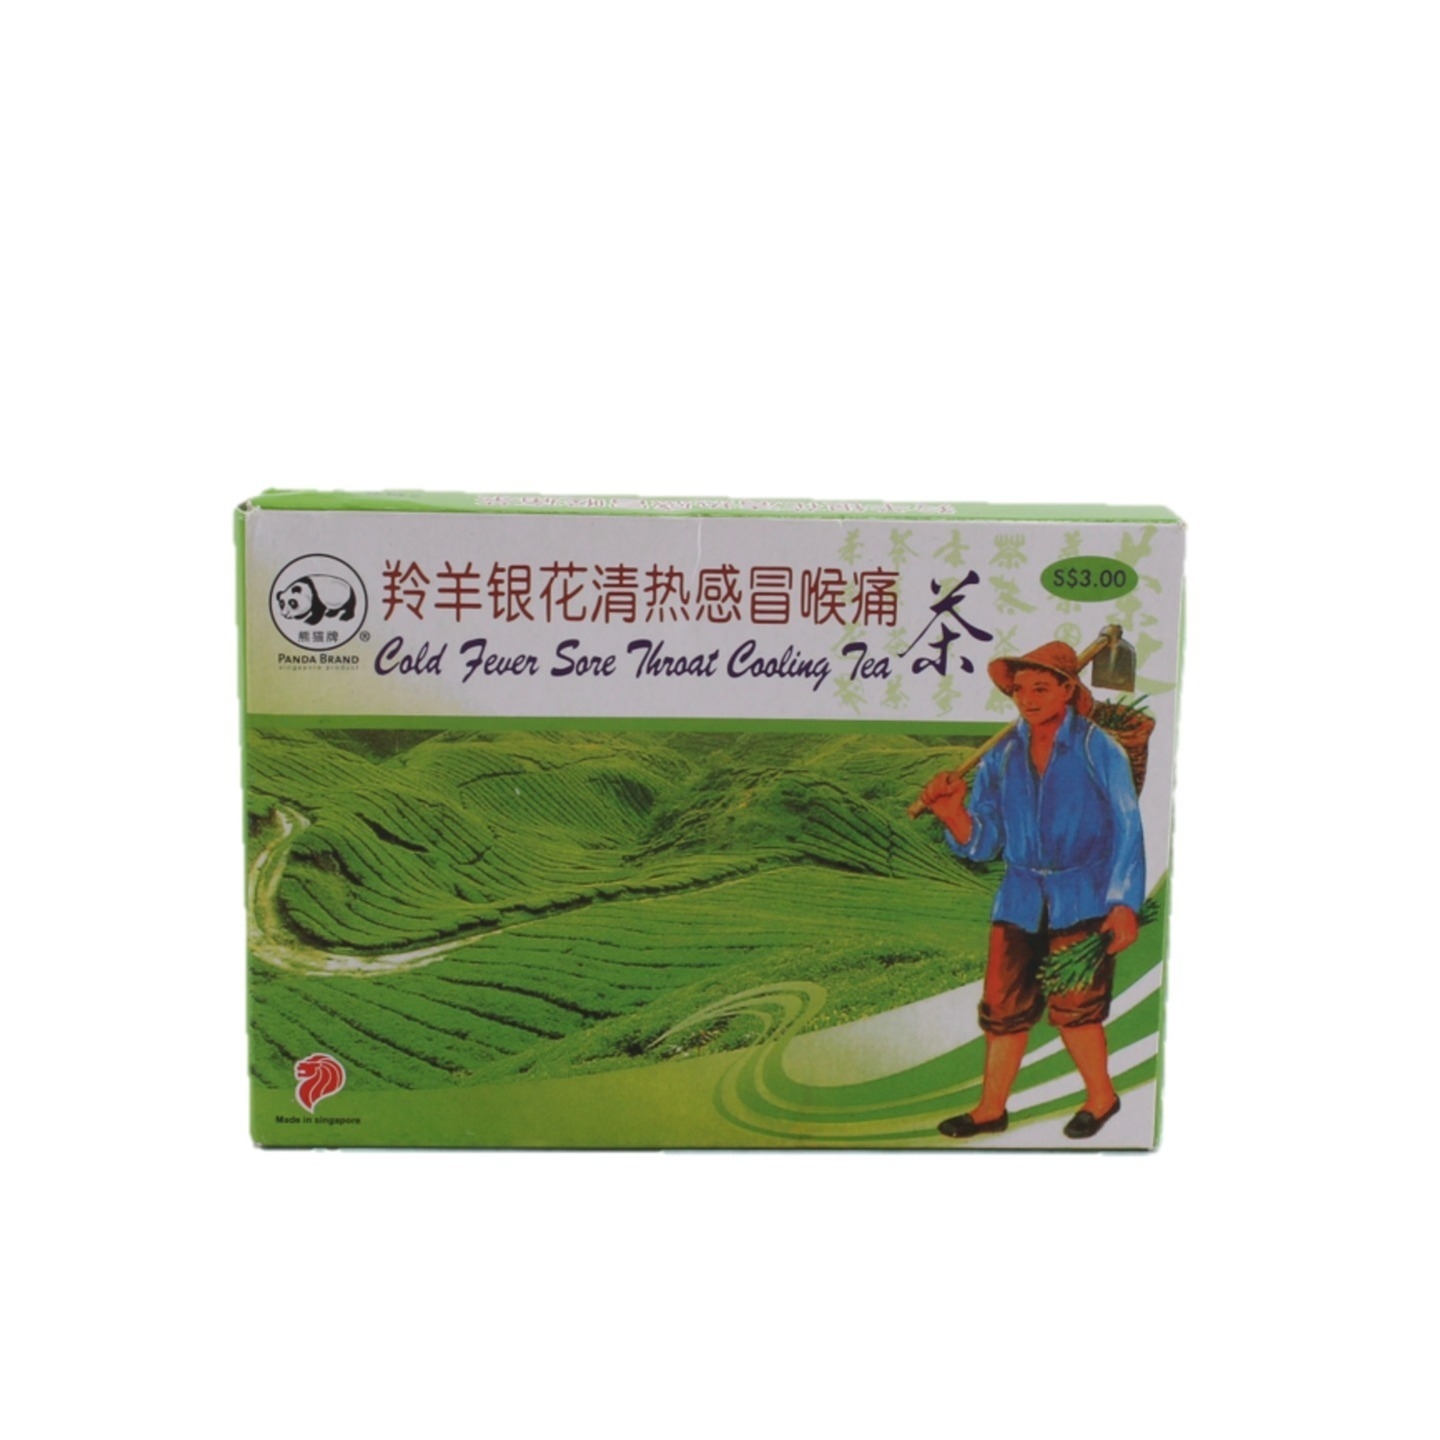 Cold Fever Sore Throat Cooling Tea 羚羊银花清热感冒喉痛 2 x 6g PROMOTION FOR 12